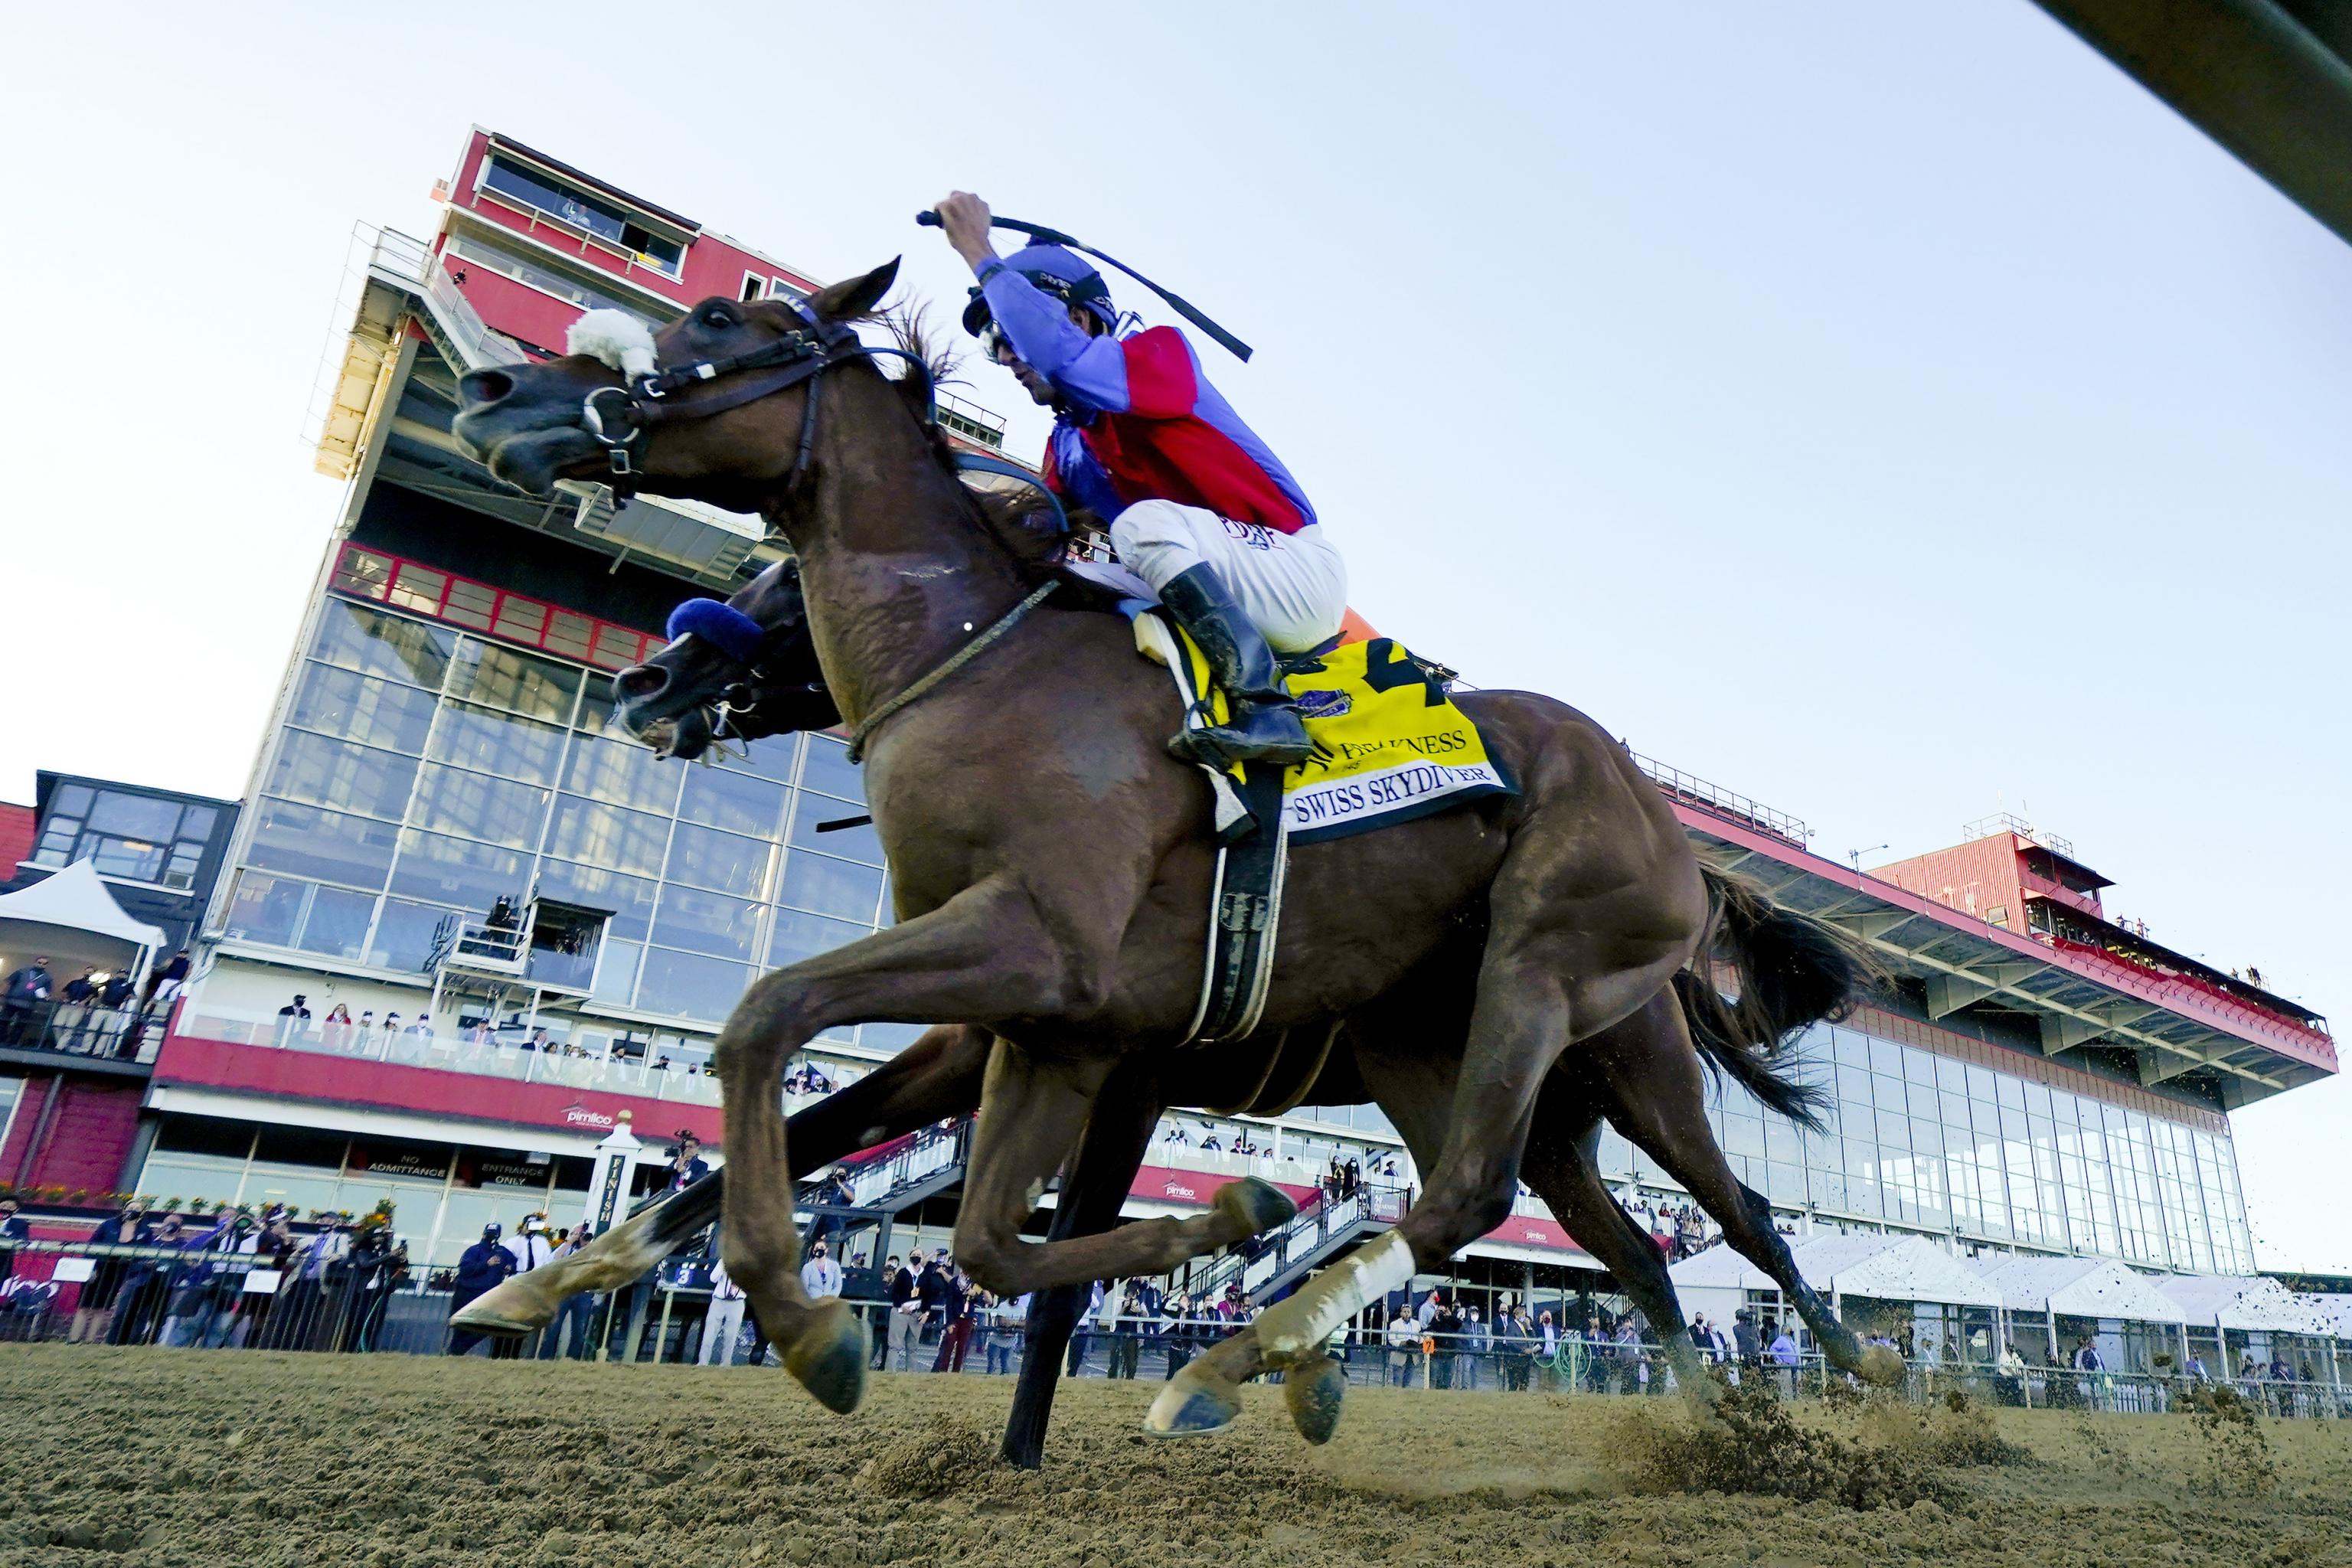 Preakness 2020 Full Results, Analysis and Video Highlights from